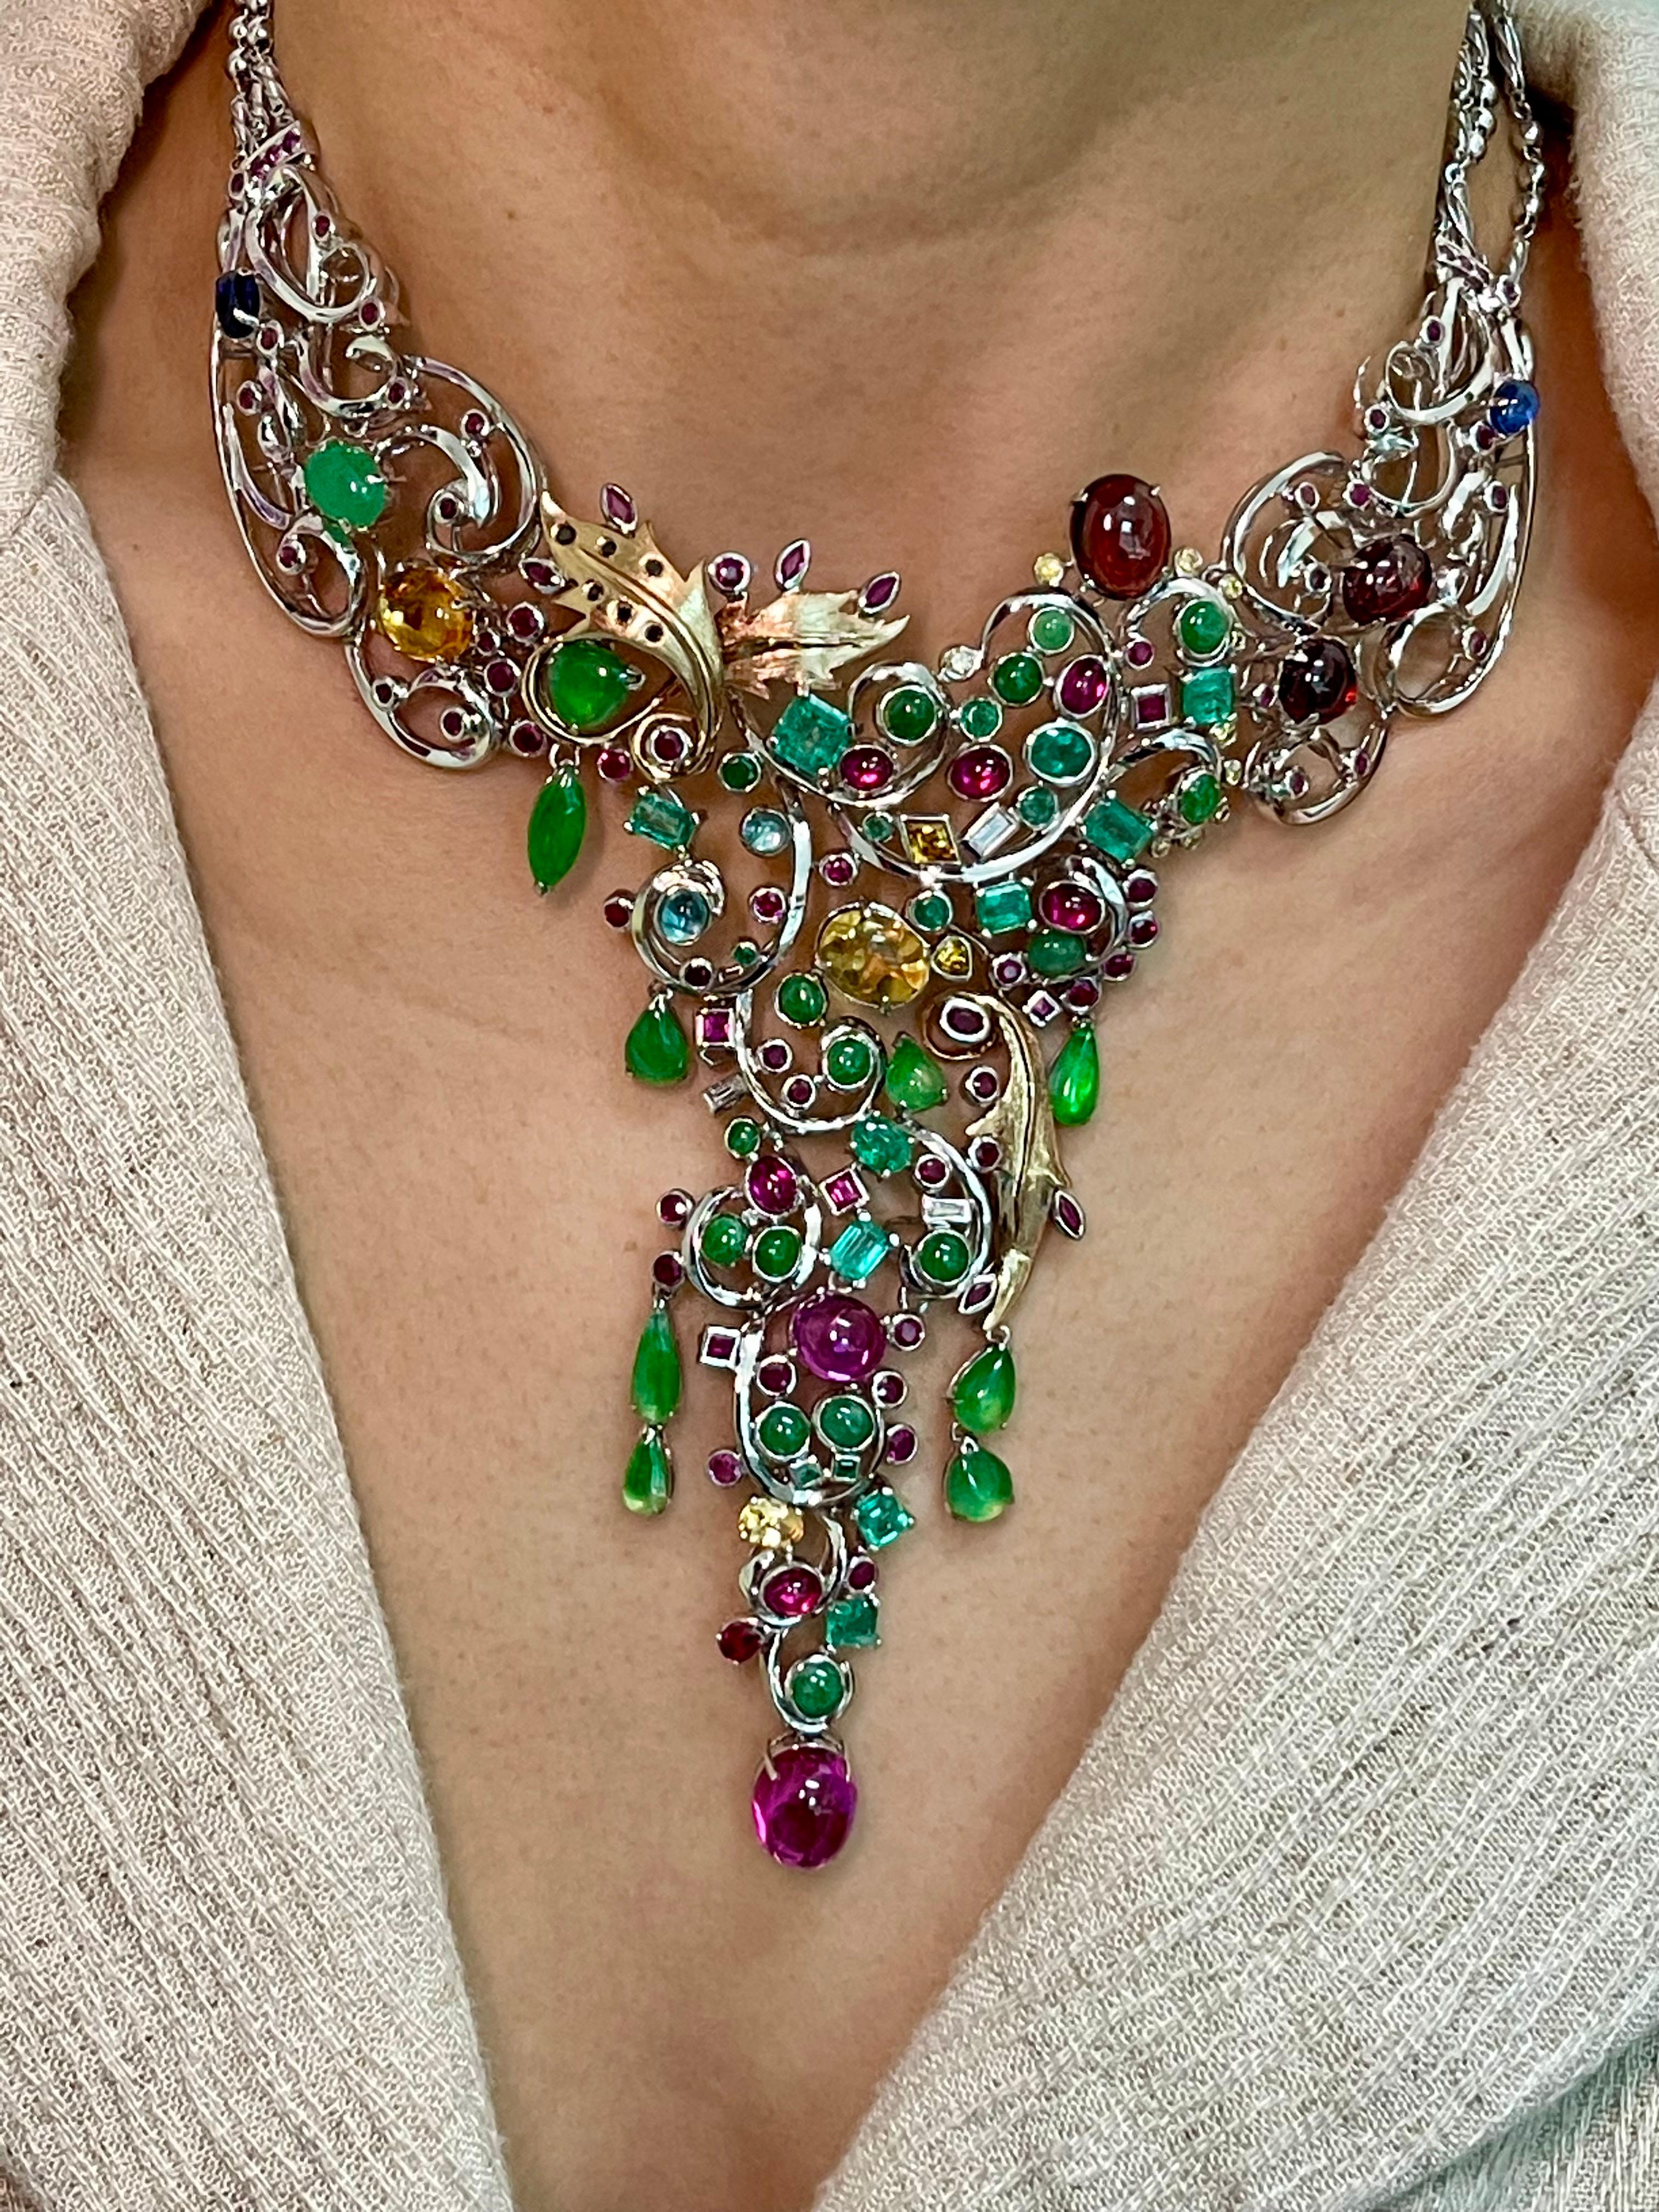 This is a massive piece of jewelry! Impressive to say the least. The workmanship is fabulous. It took many man hours to custom set all these stones. The many photos will paint a thousand words. The necklace is made in 18k gold. It is made up of many